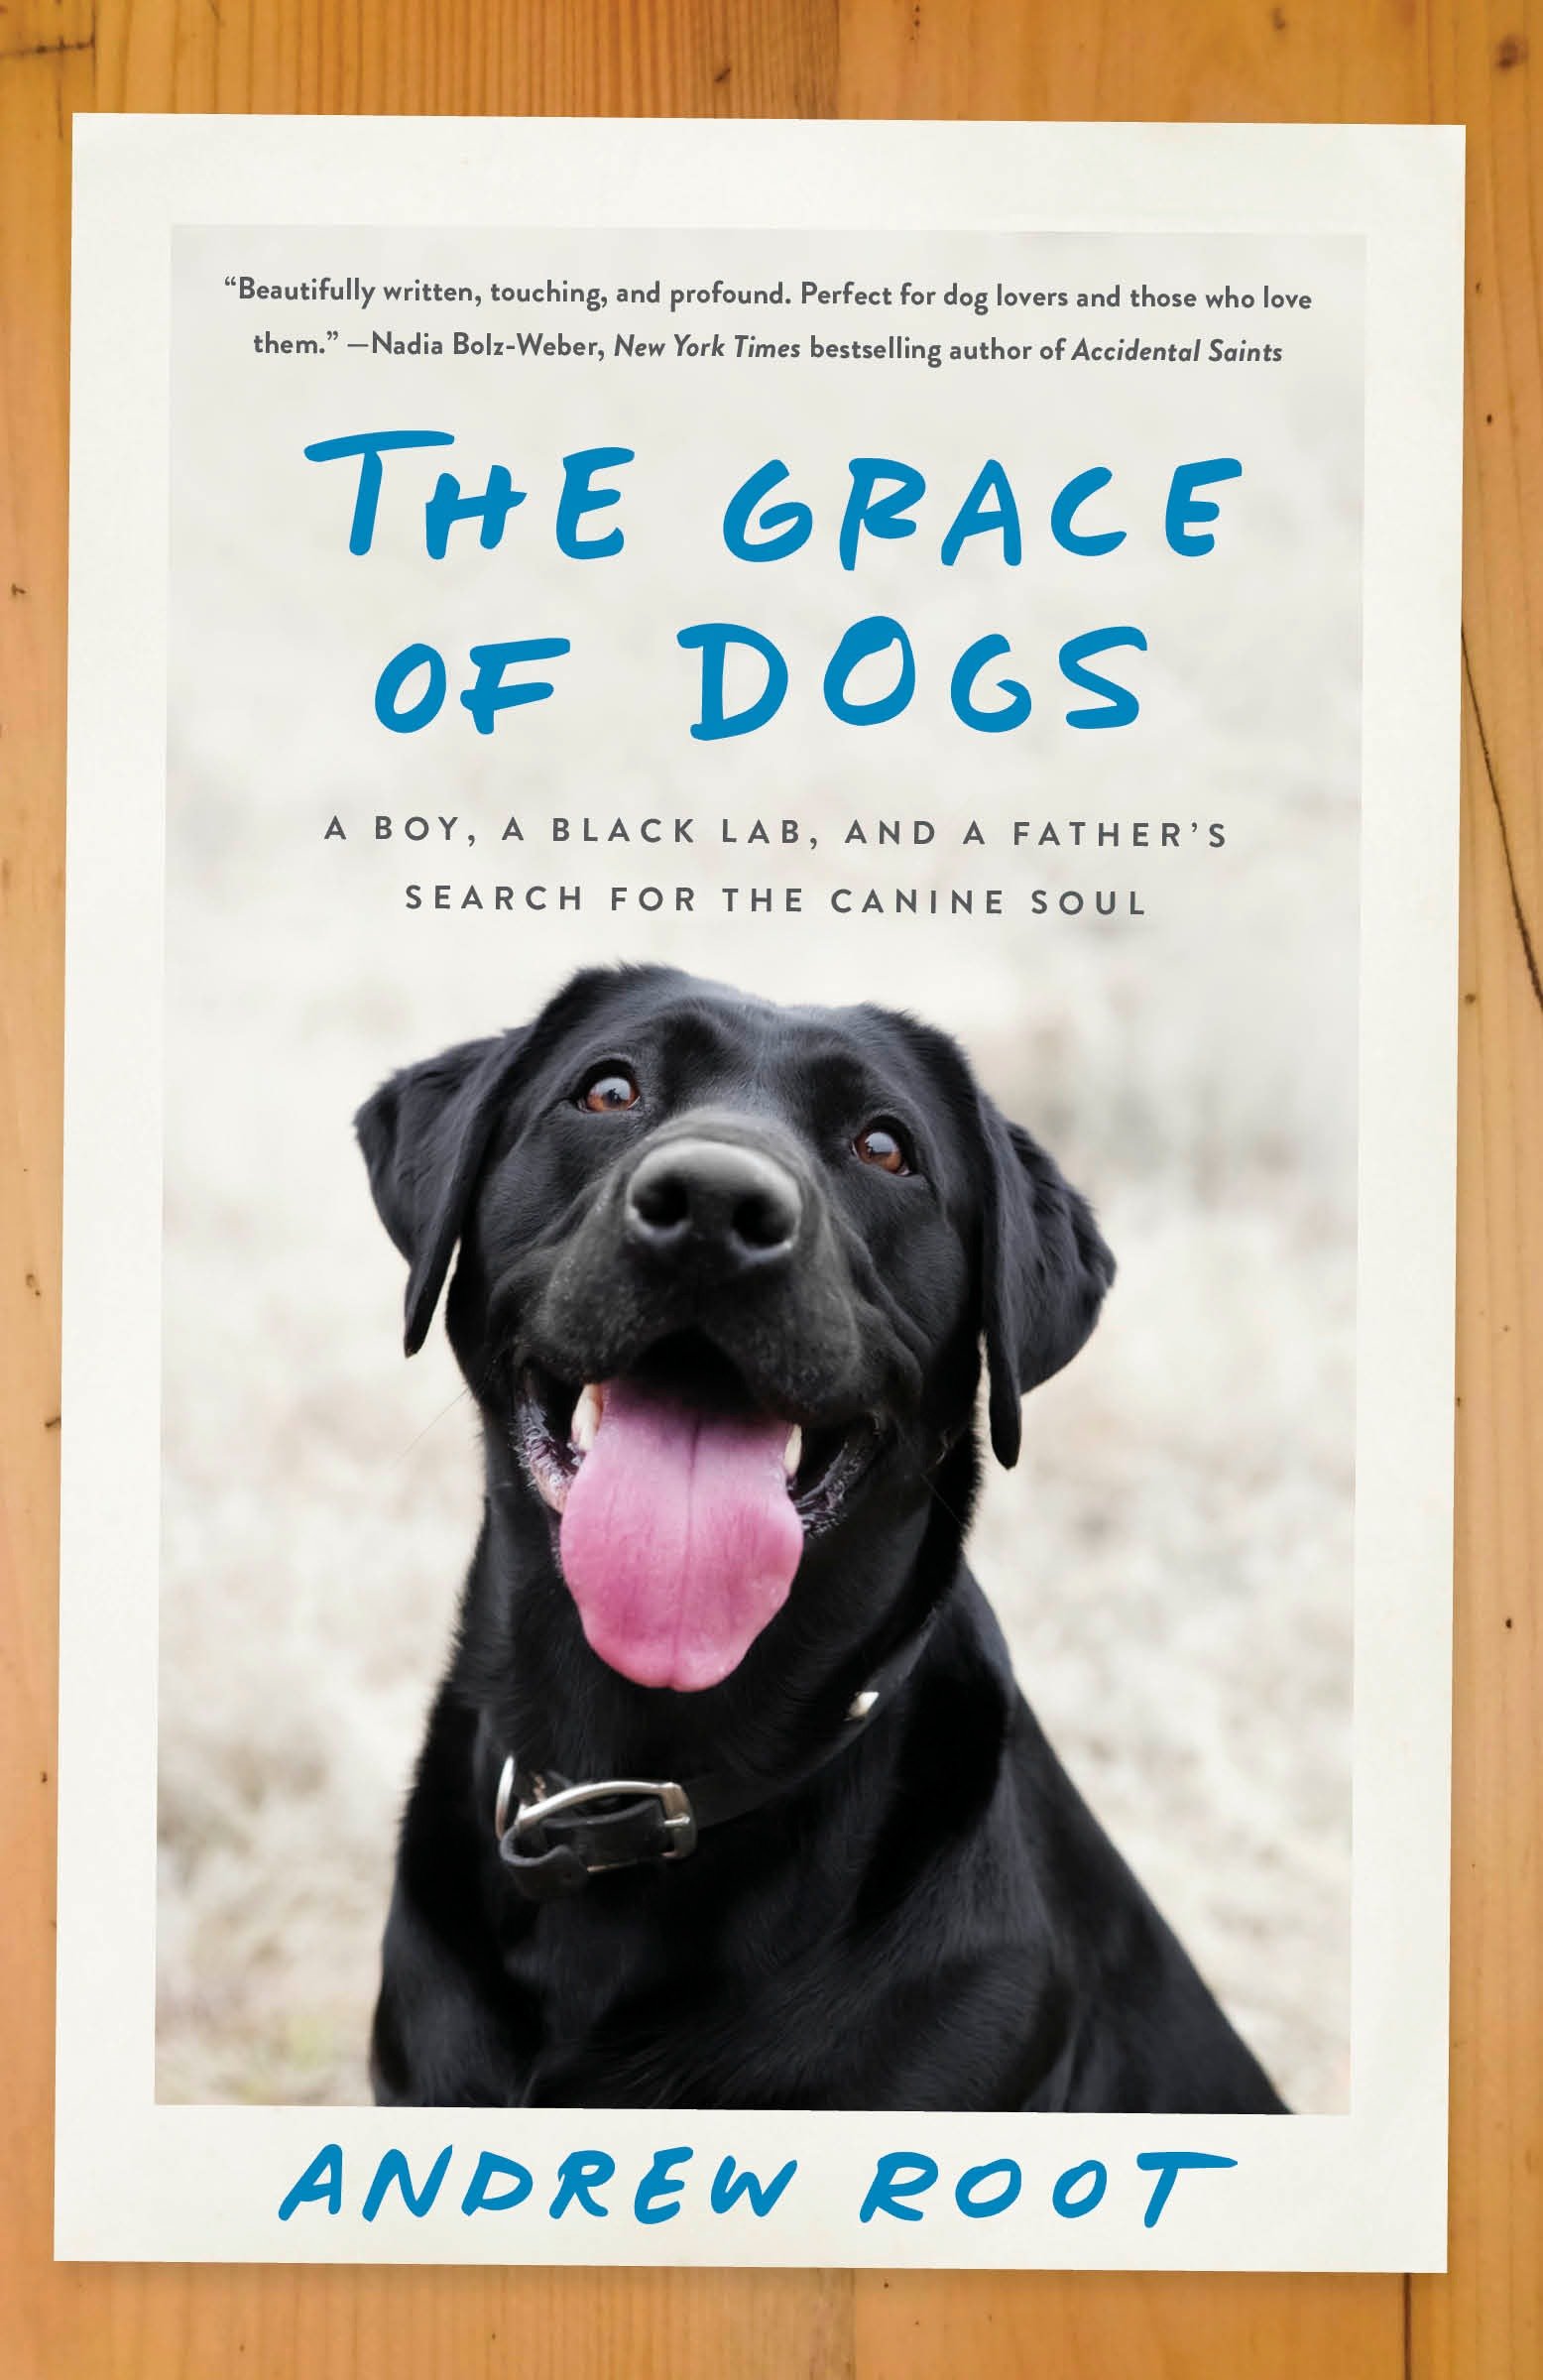 The grace of dogs a boy, a black Lab, and a father's search for the canine soul cover image